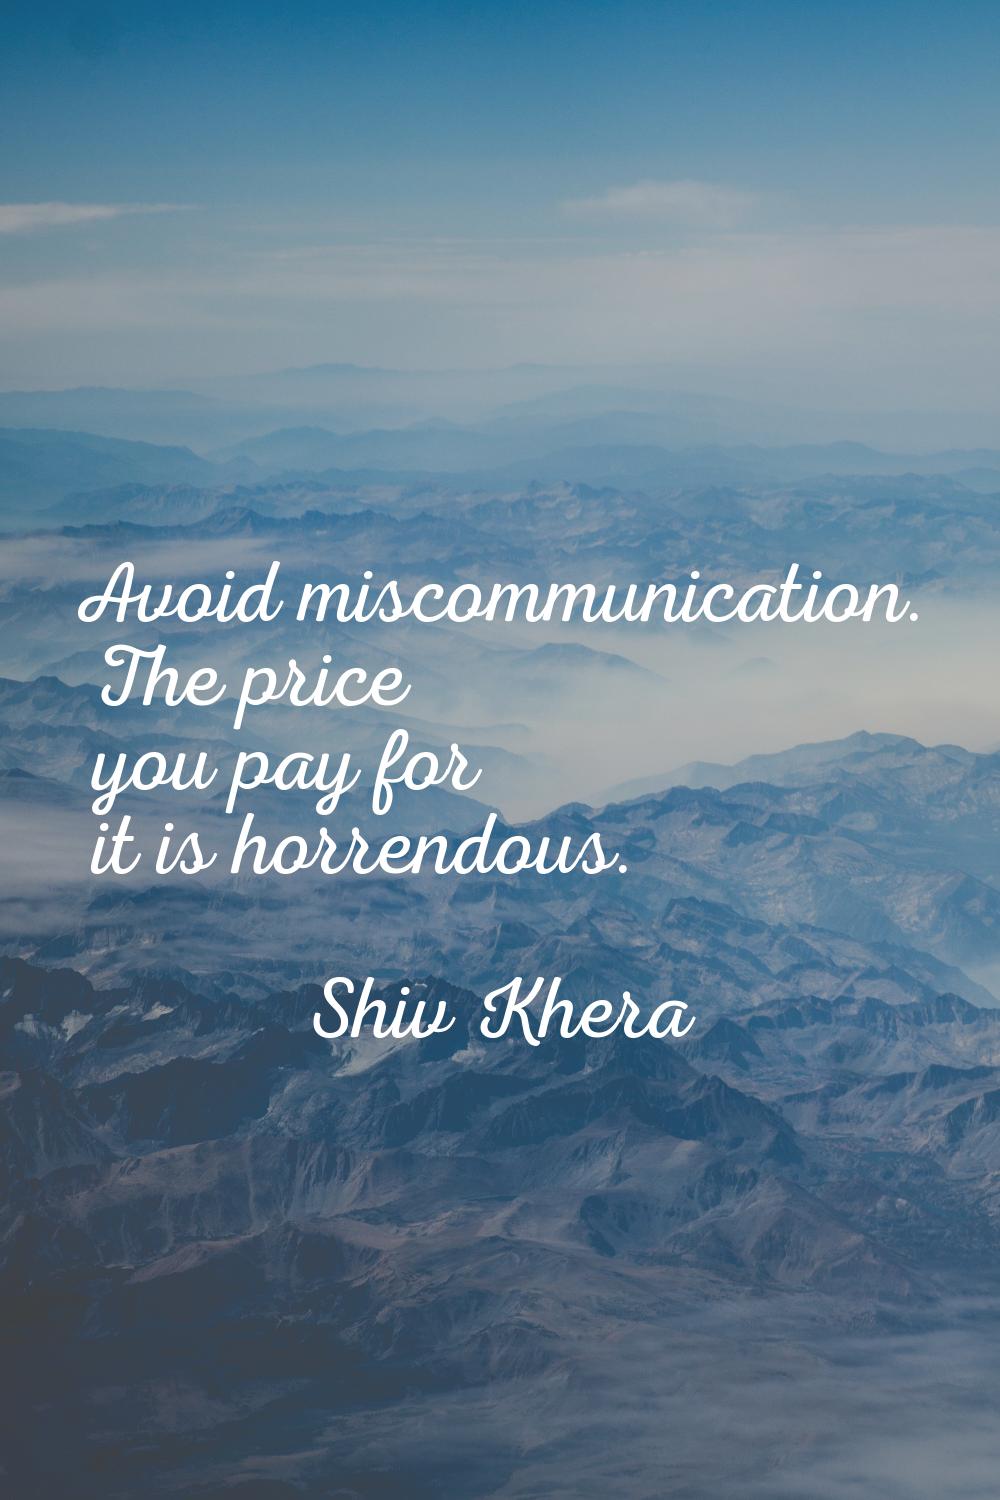 Avoid miscommunication. The price you pay for it is horrendous.